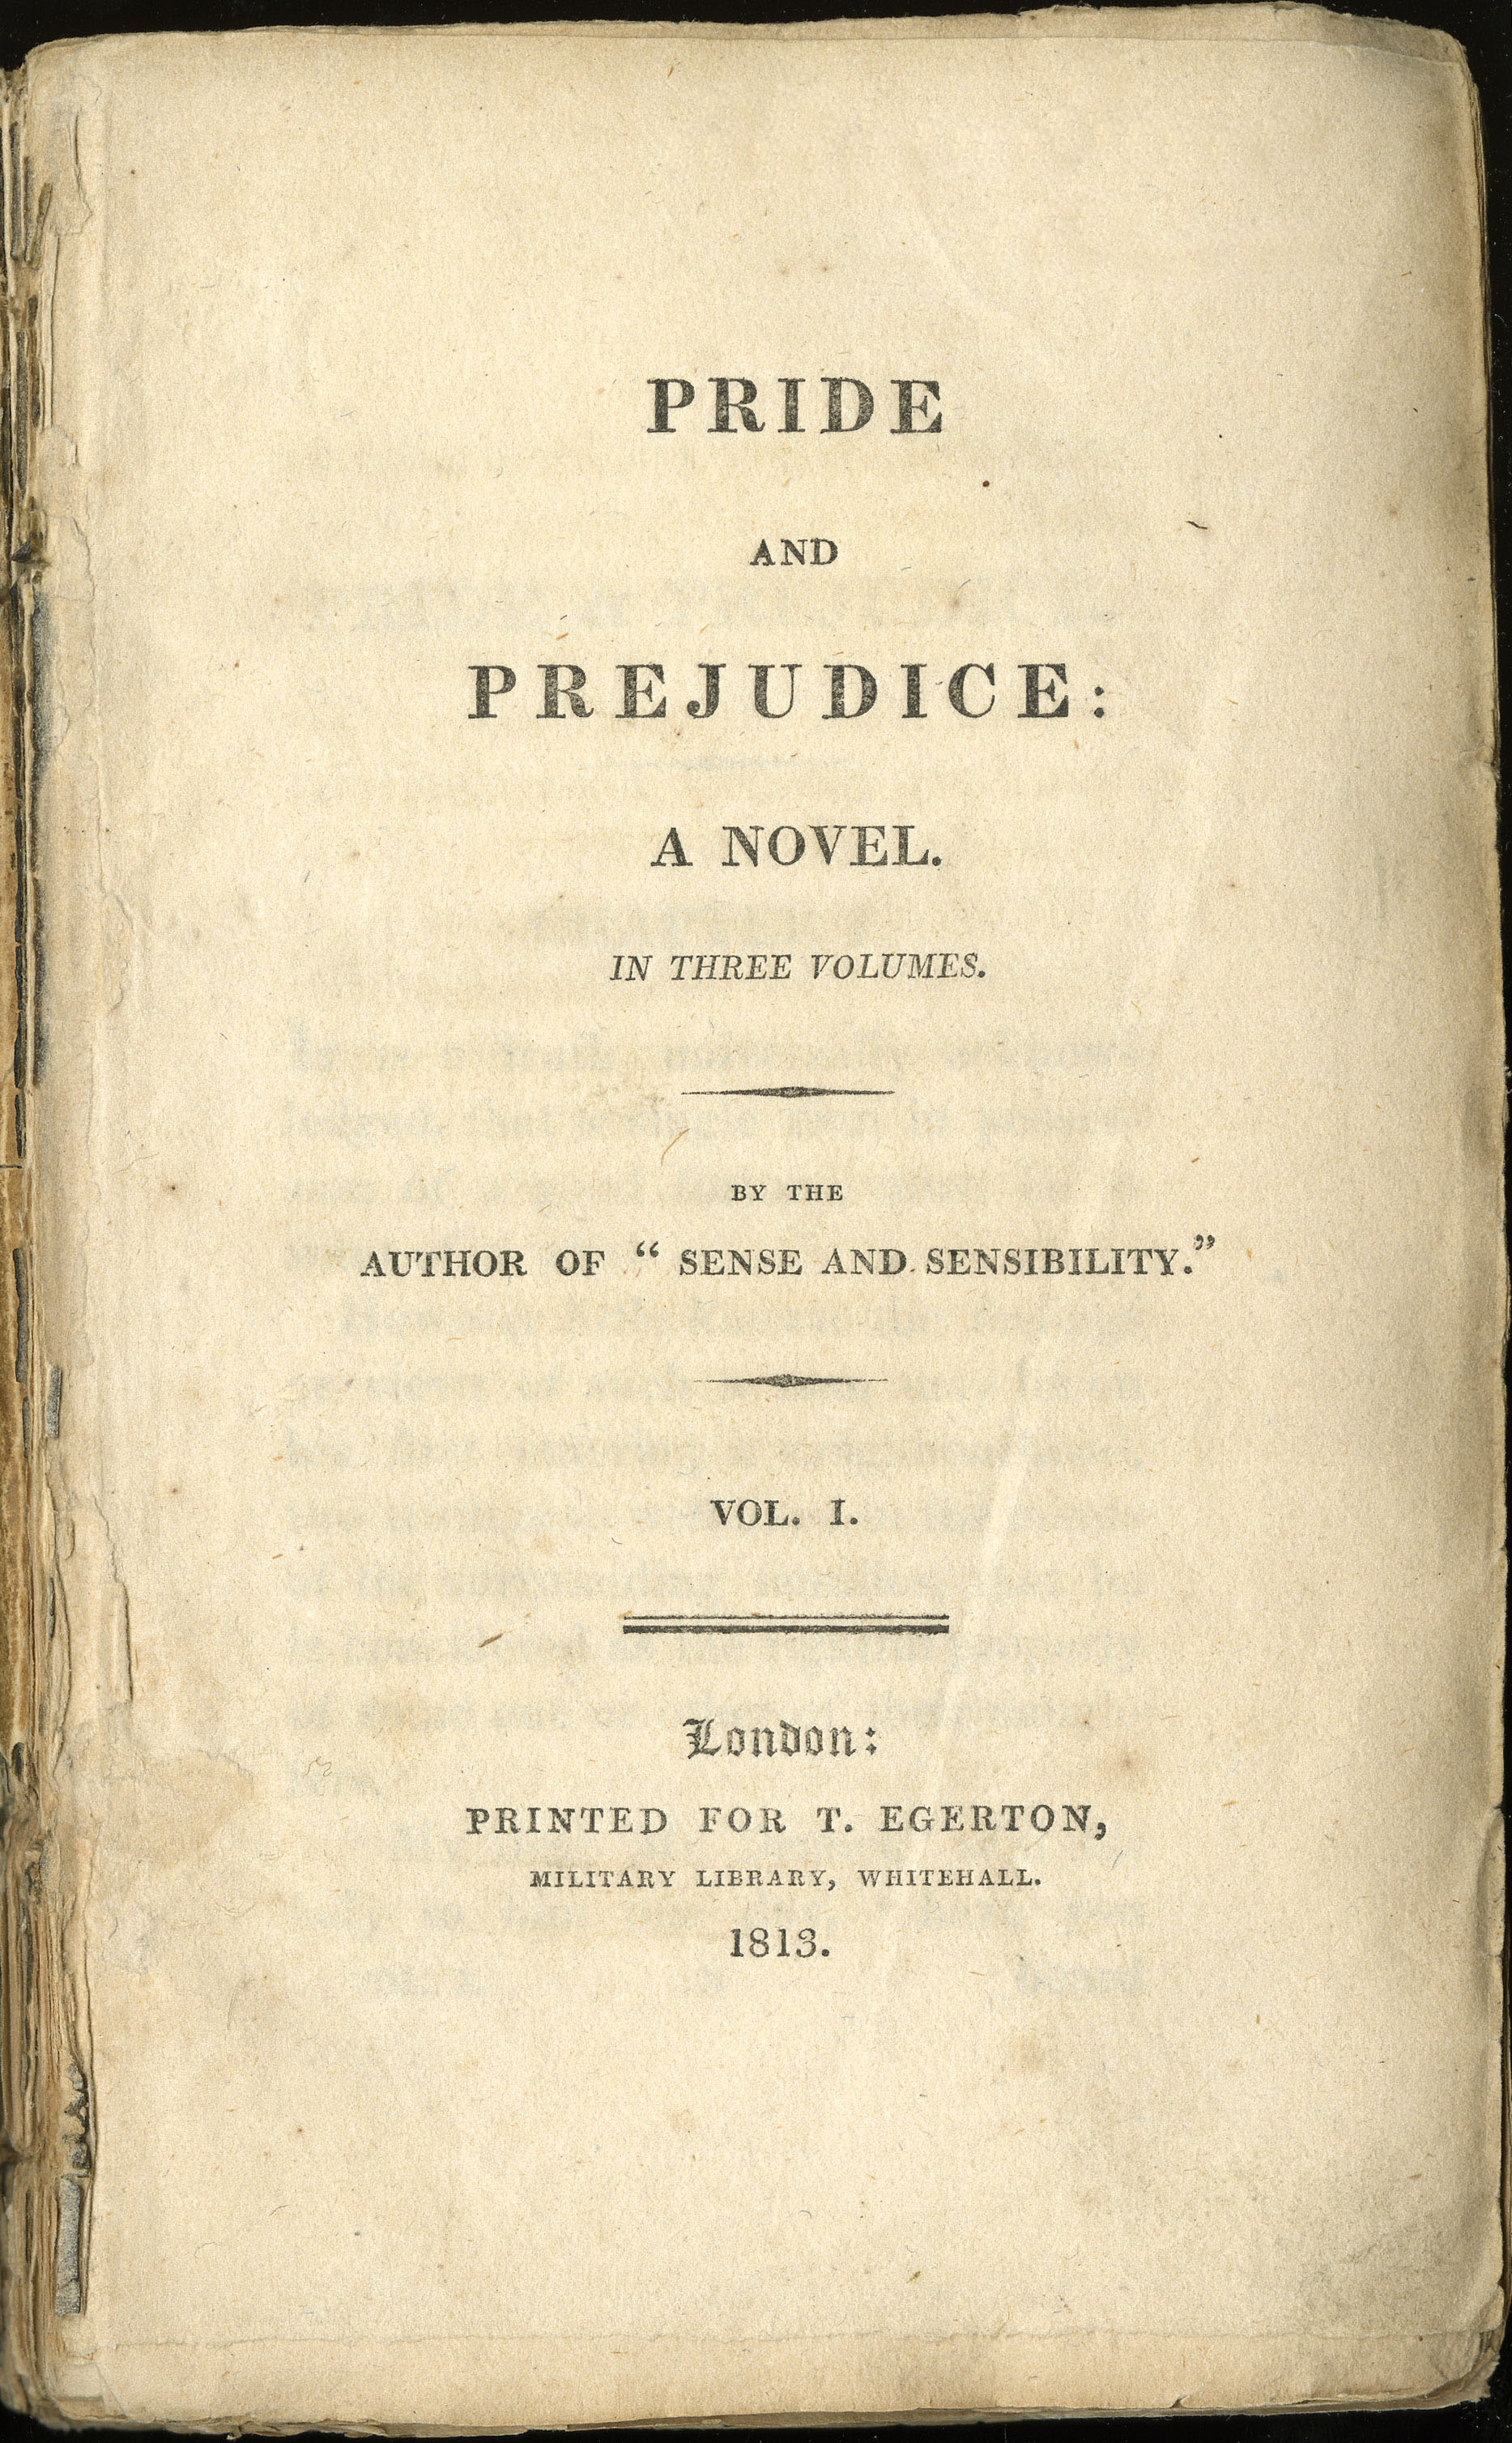 An image of the title page from Pride and Prejudice, first published in 1813.